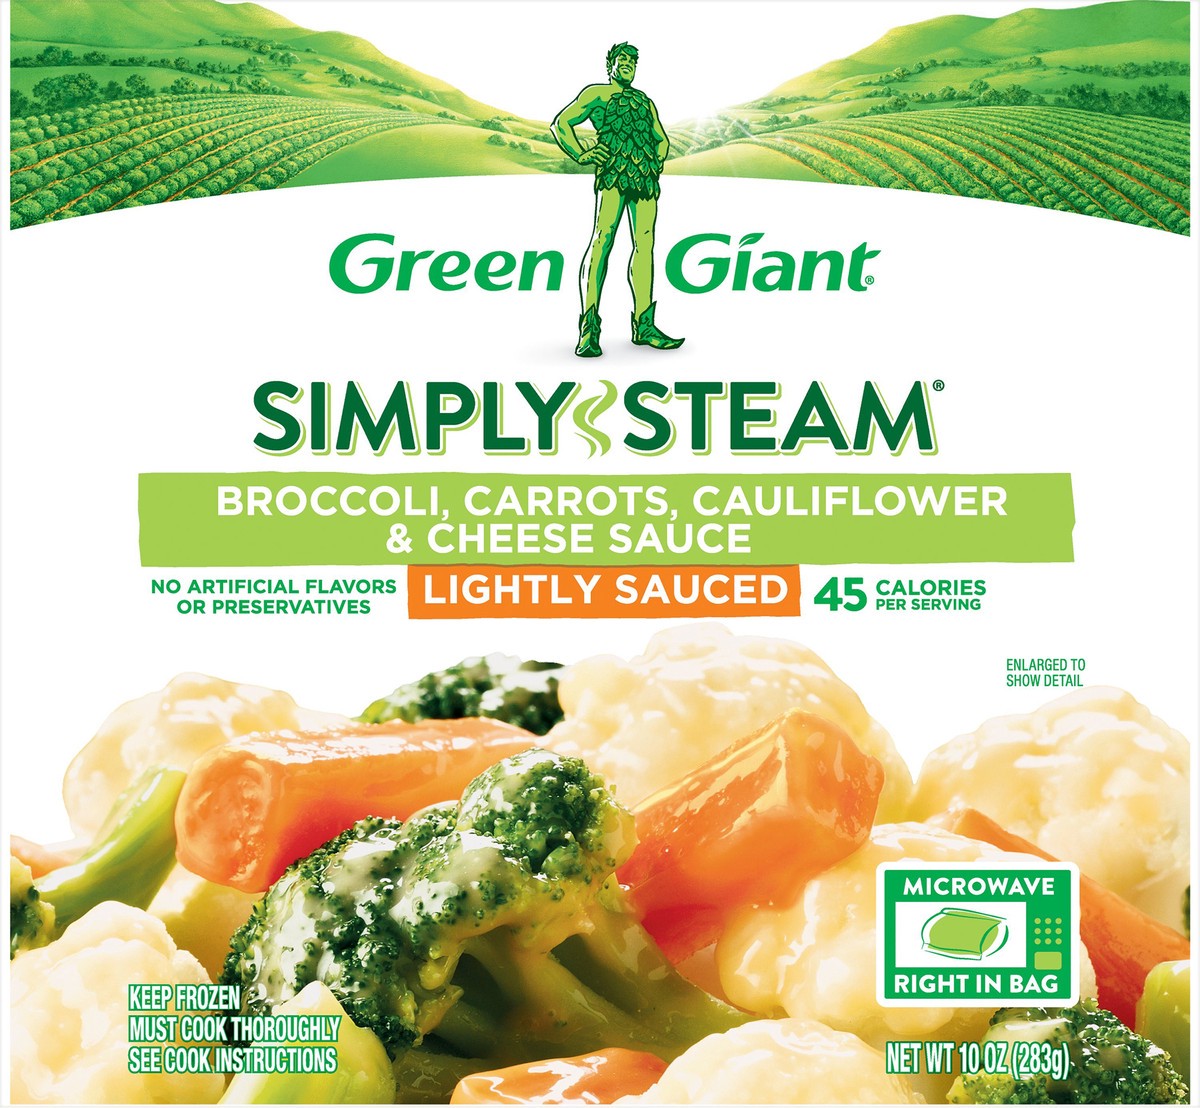 slide 4 of 4, Green Giant Simply Steam Lightly Sauced Broccoli, Carrots, Cauliflower & Cheese Sauce 10 oz, 12 oz